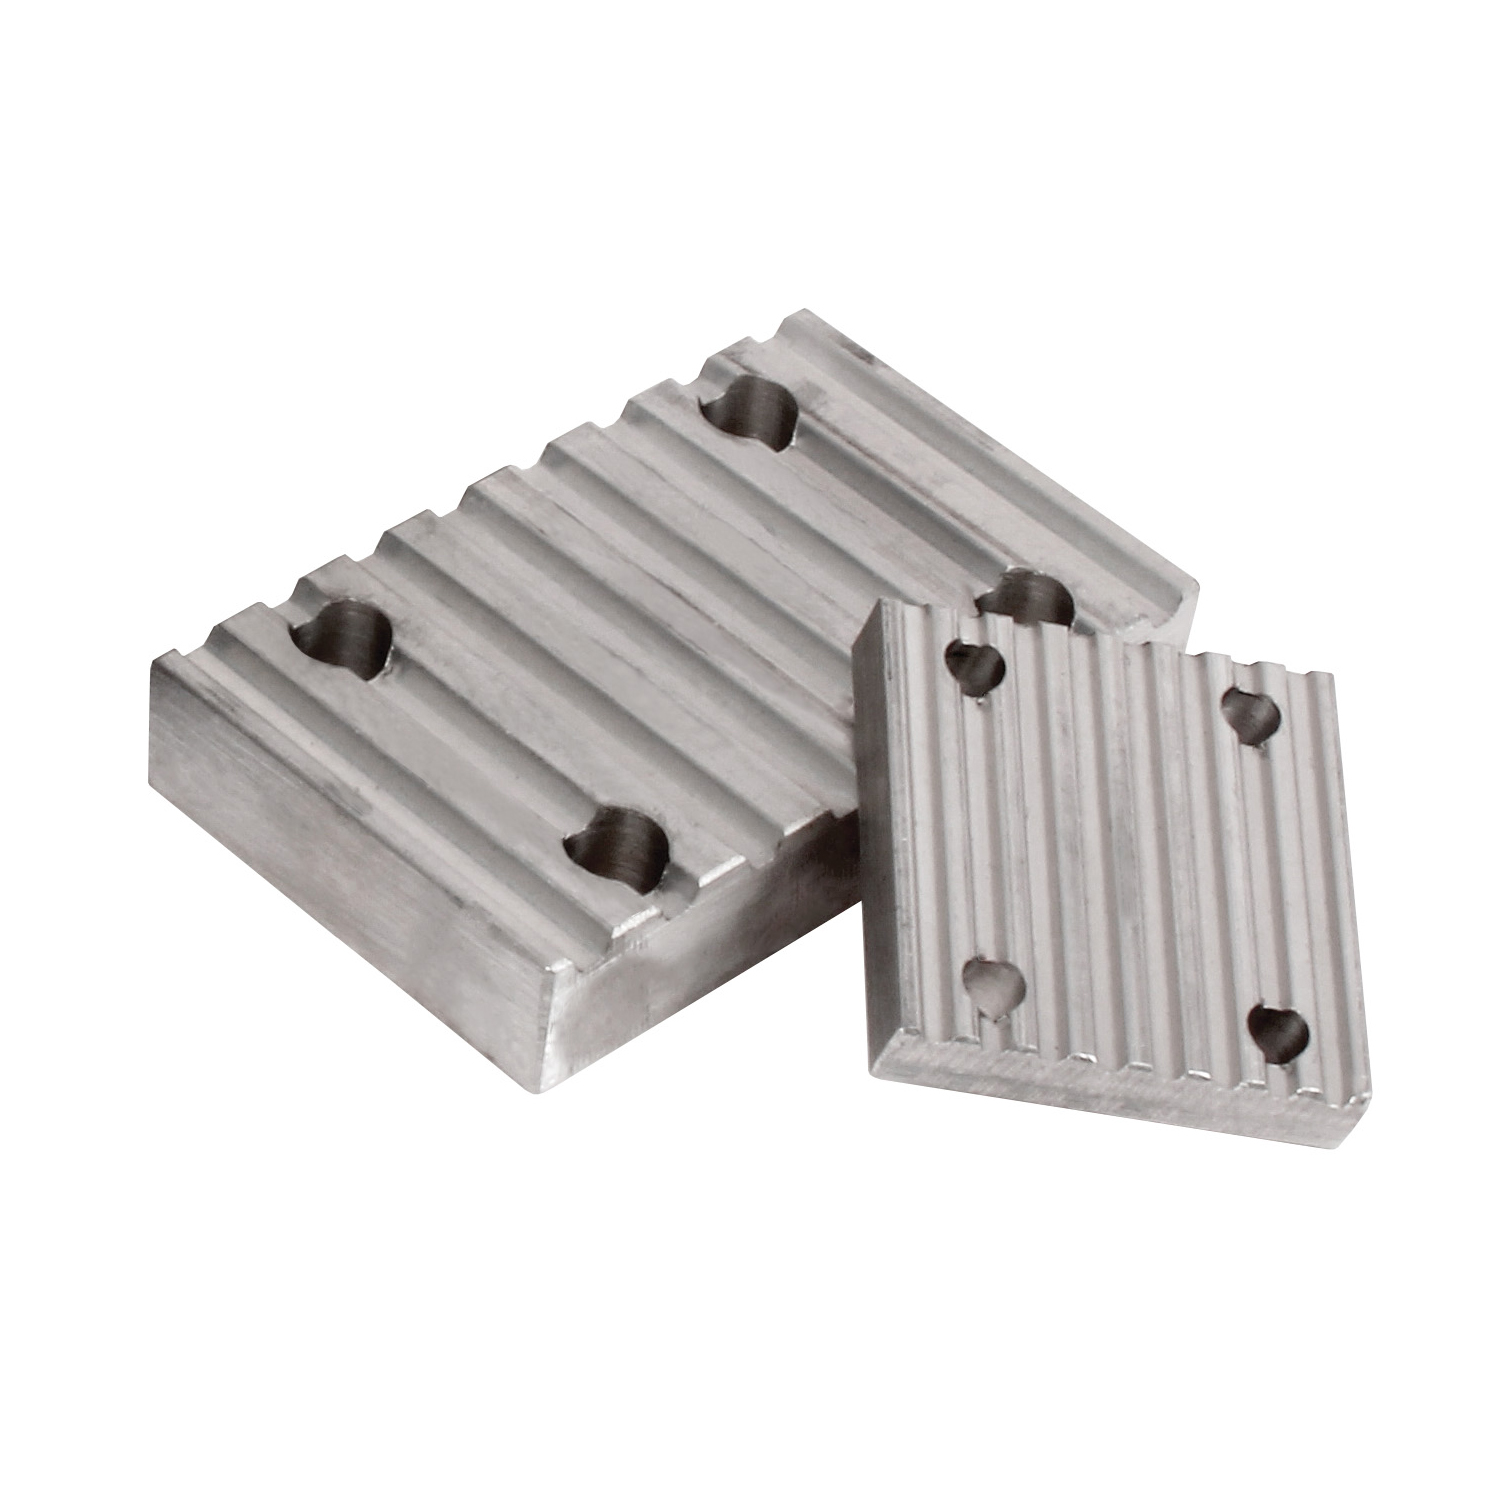 Connecting plate for T type timing belts - T5 - 25mm - T